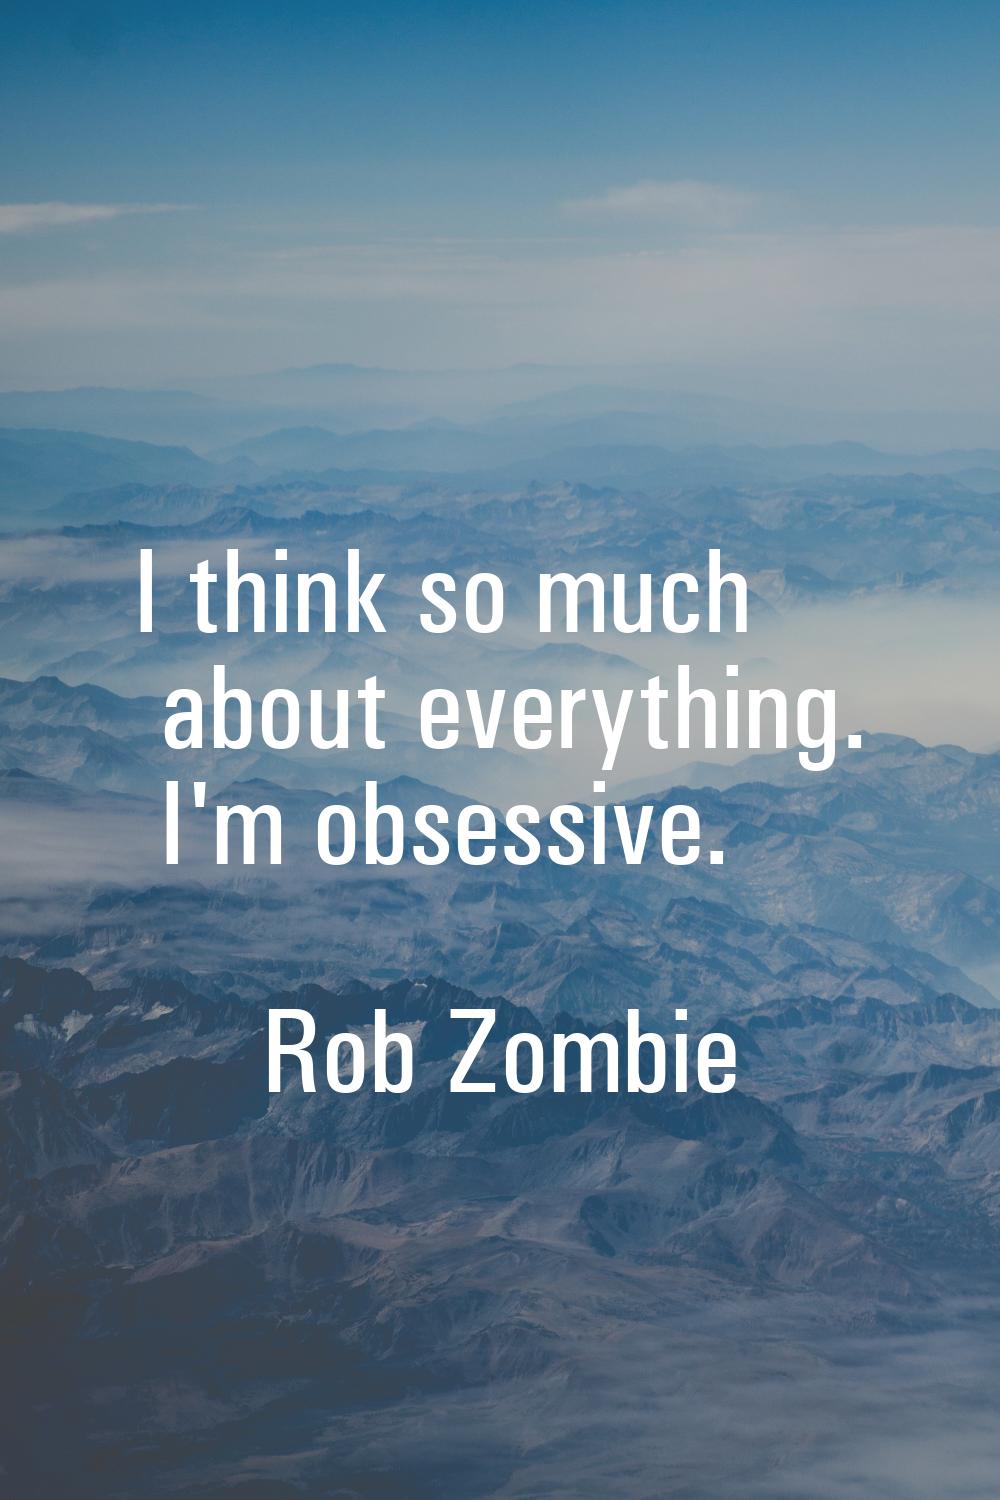 I think so much about everything. I'm obsessive.